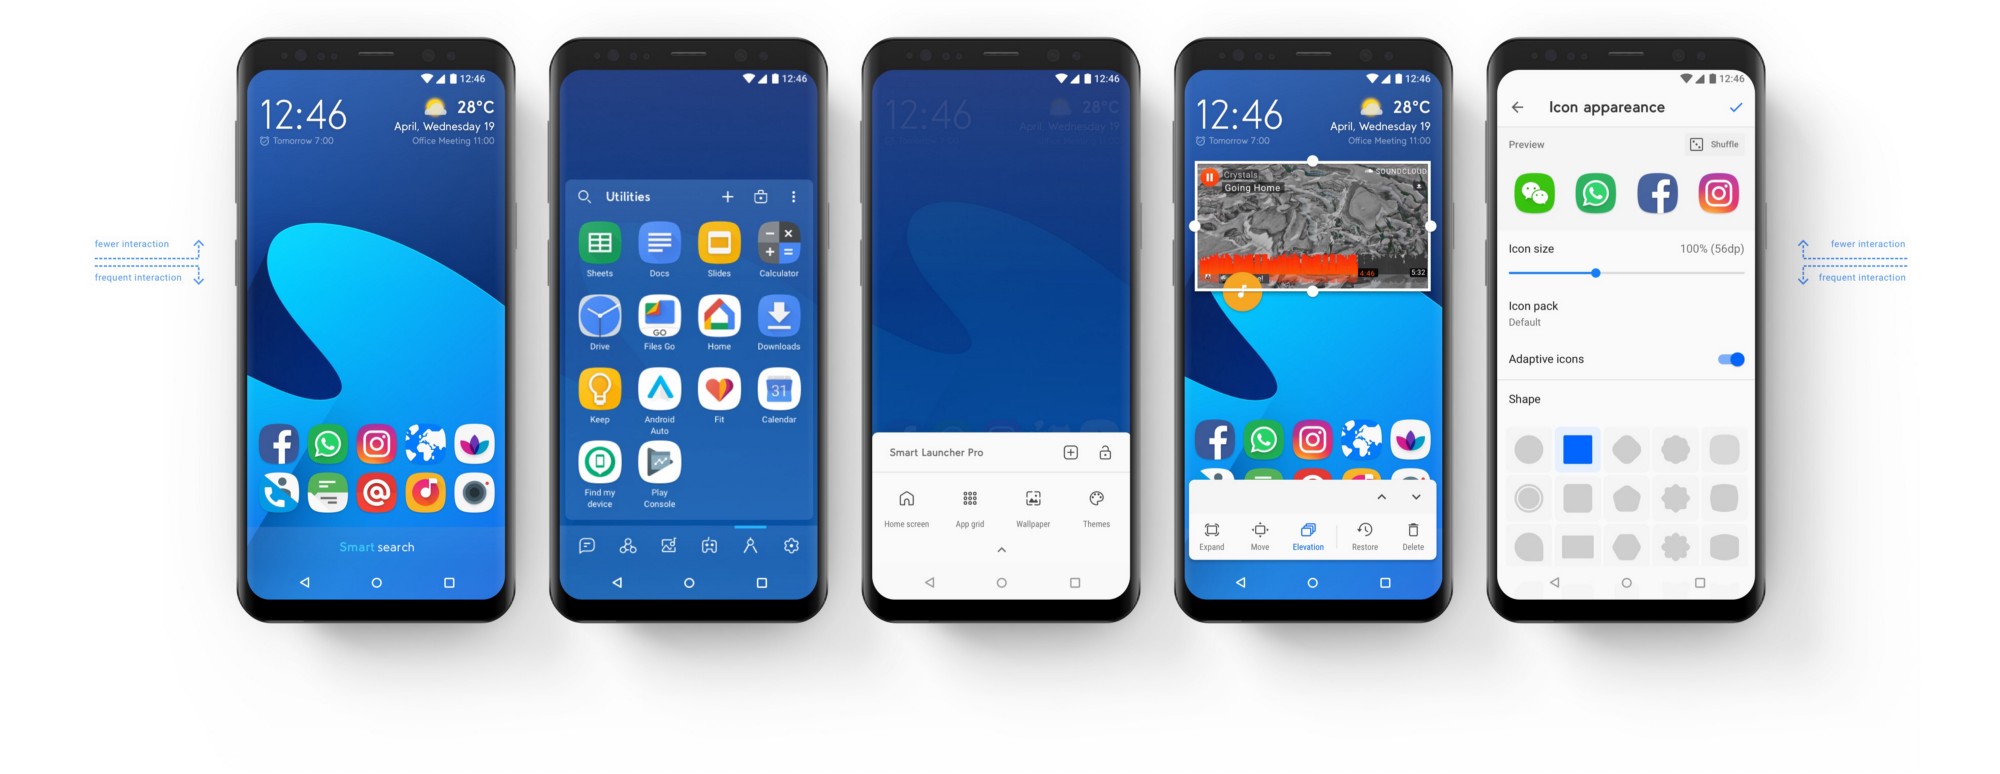 Smart Launcher Finally Rolling Out Version 5 To Android Devices Android Community